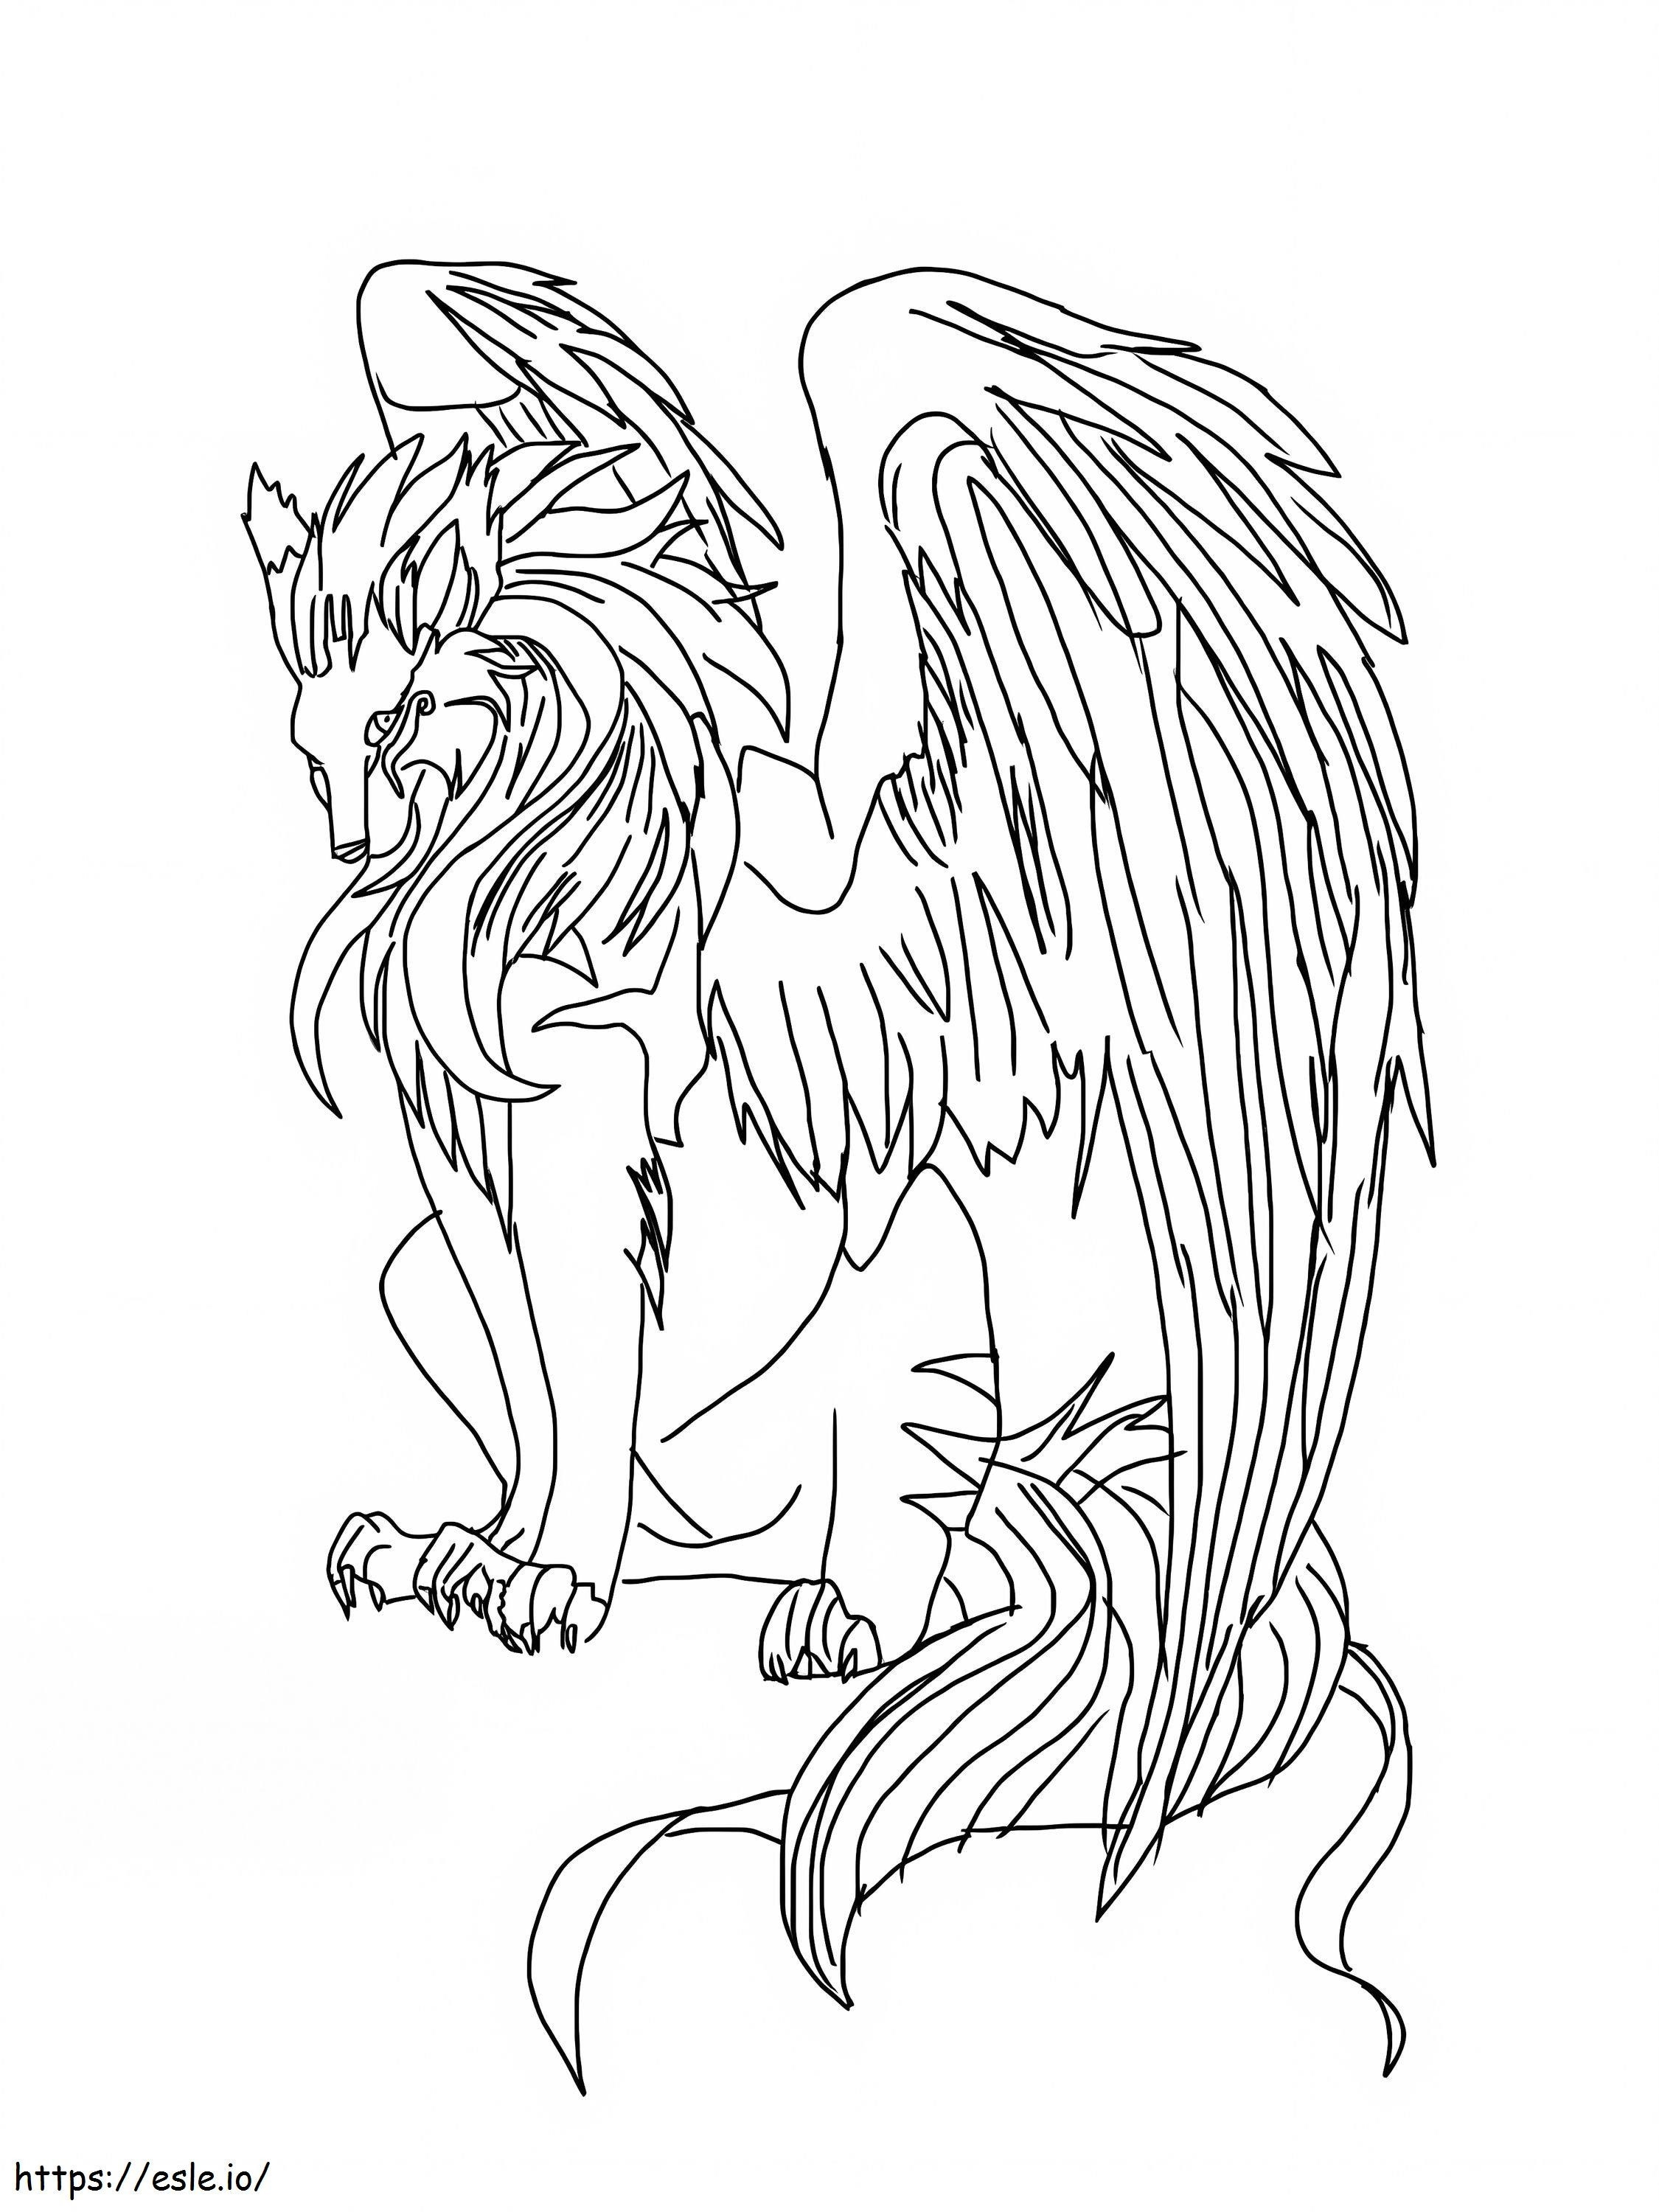 Wolves With Wings coloring page